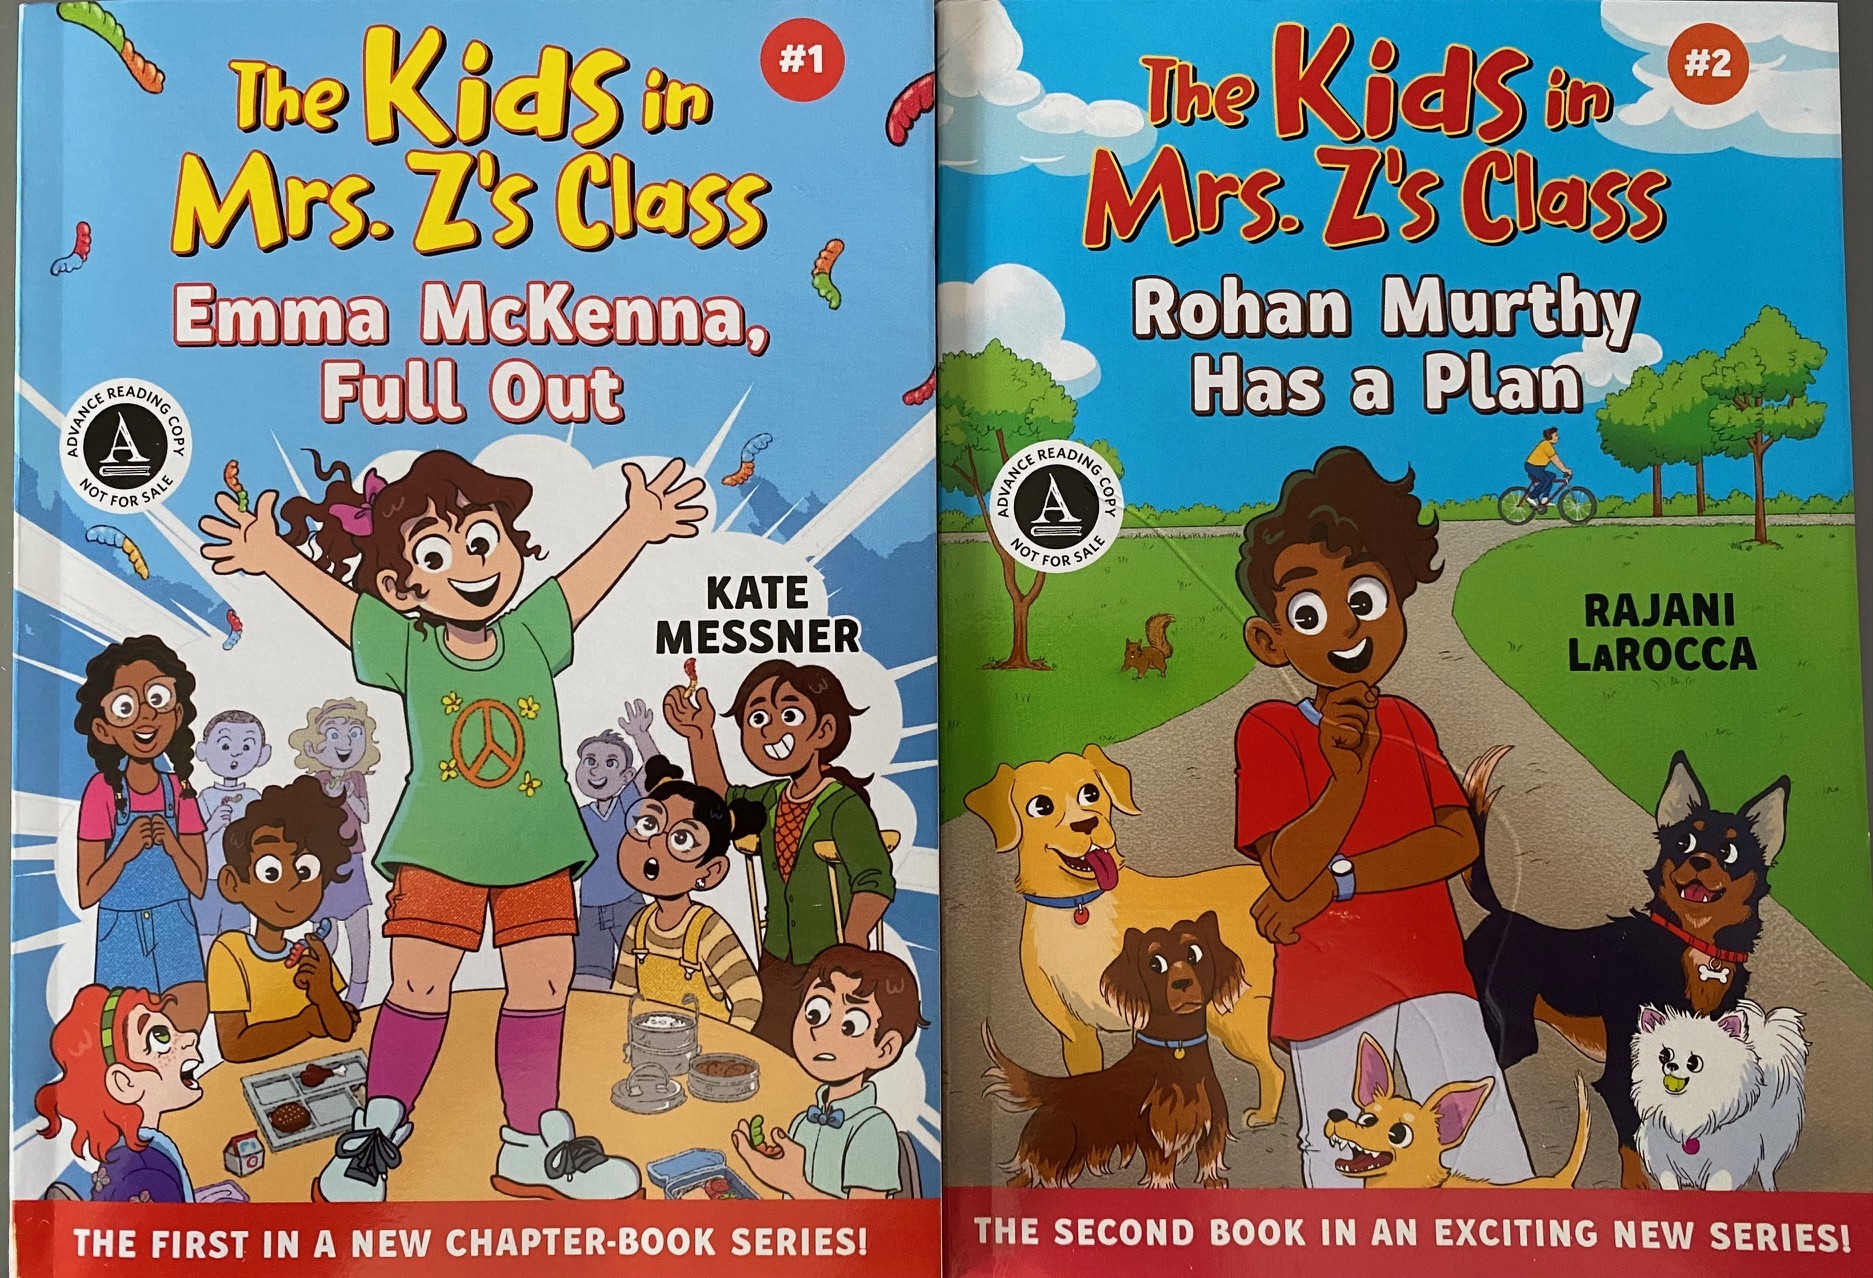 Book Review: The Kids in Mrs. Z’s Class books 1 and 2